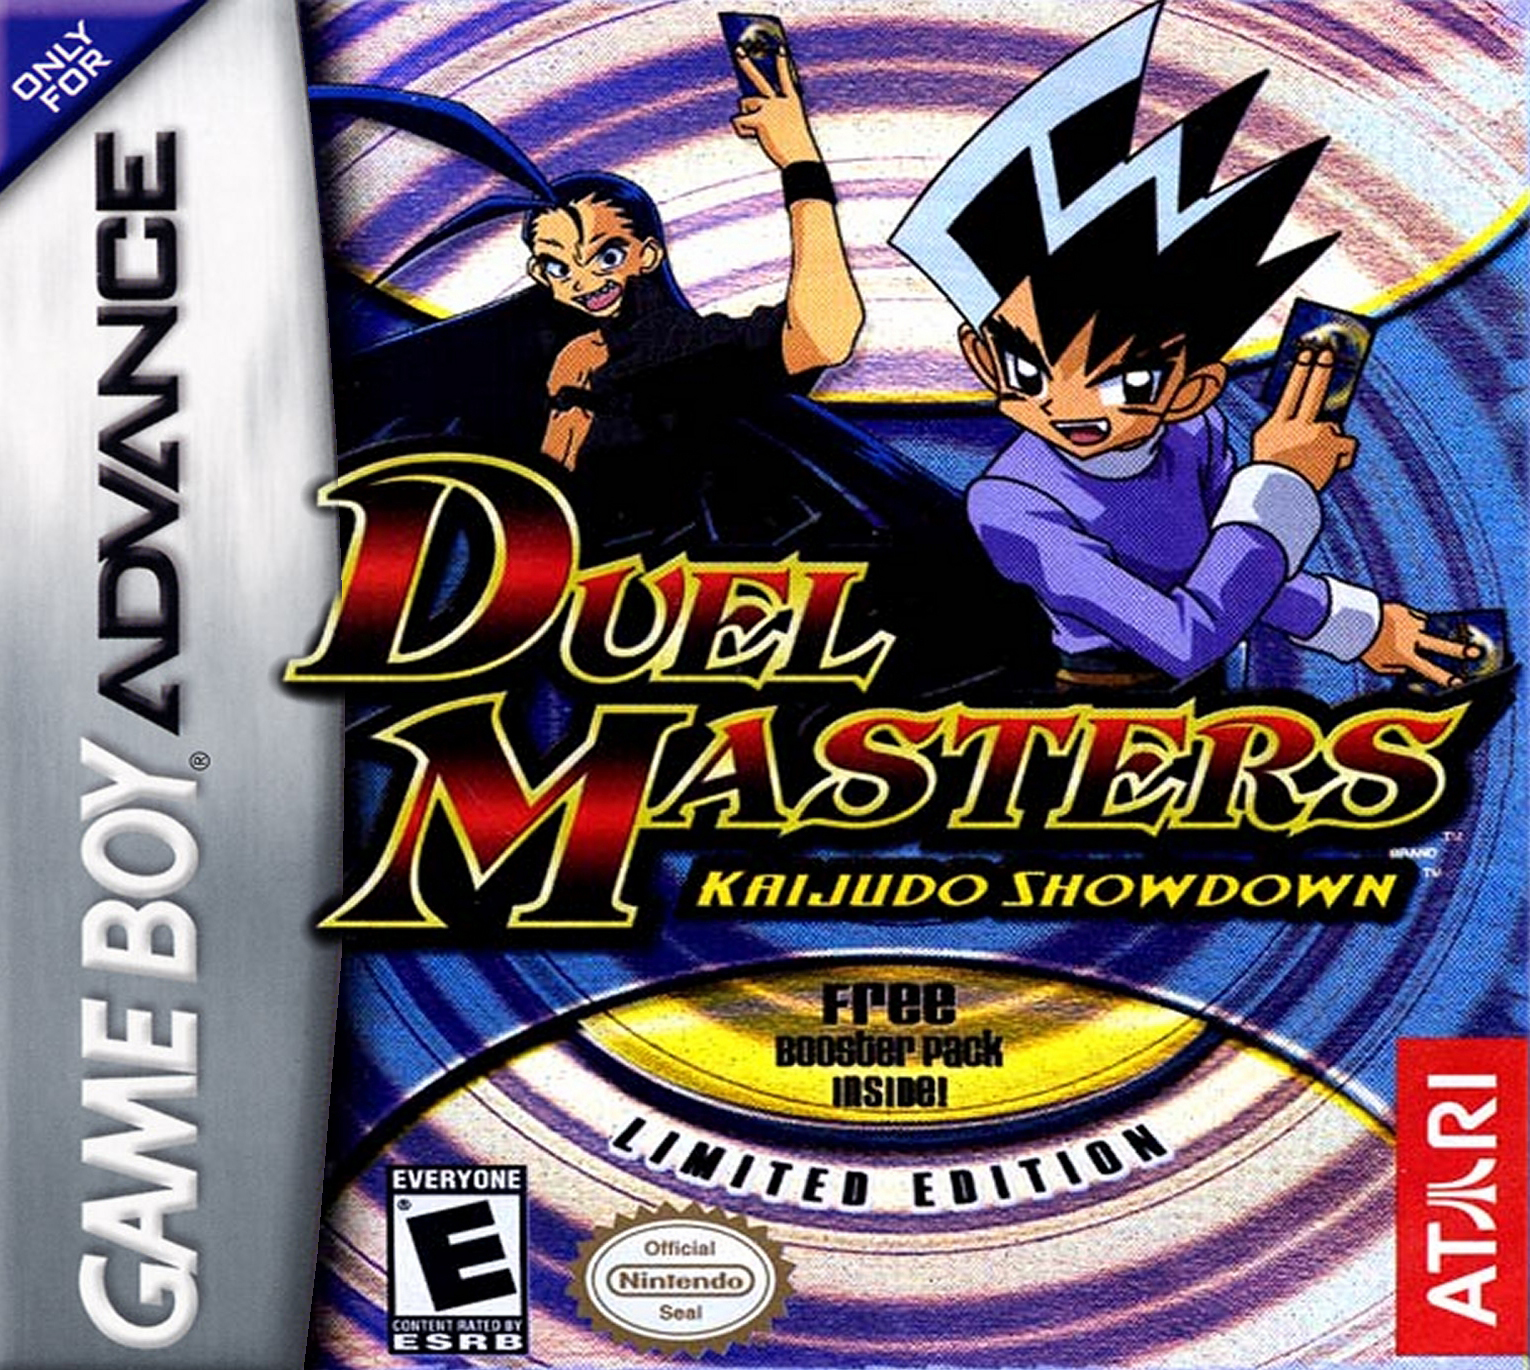 duel masters online game download